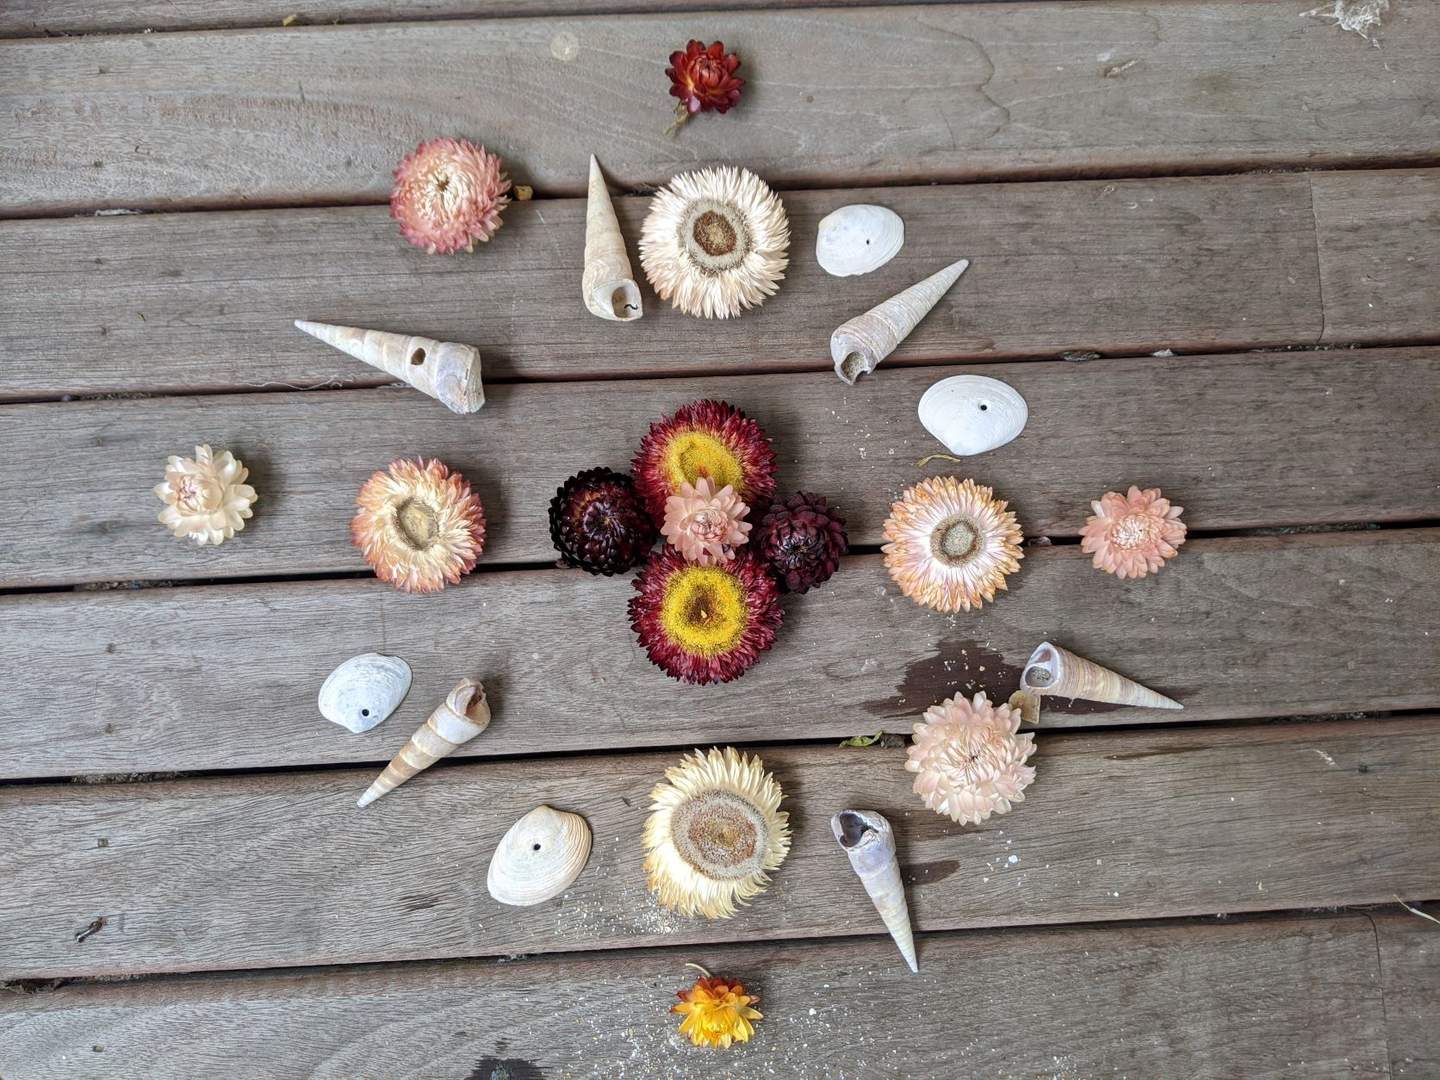 Nature mandala made from shells and flowers.